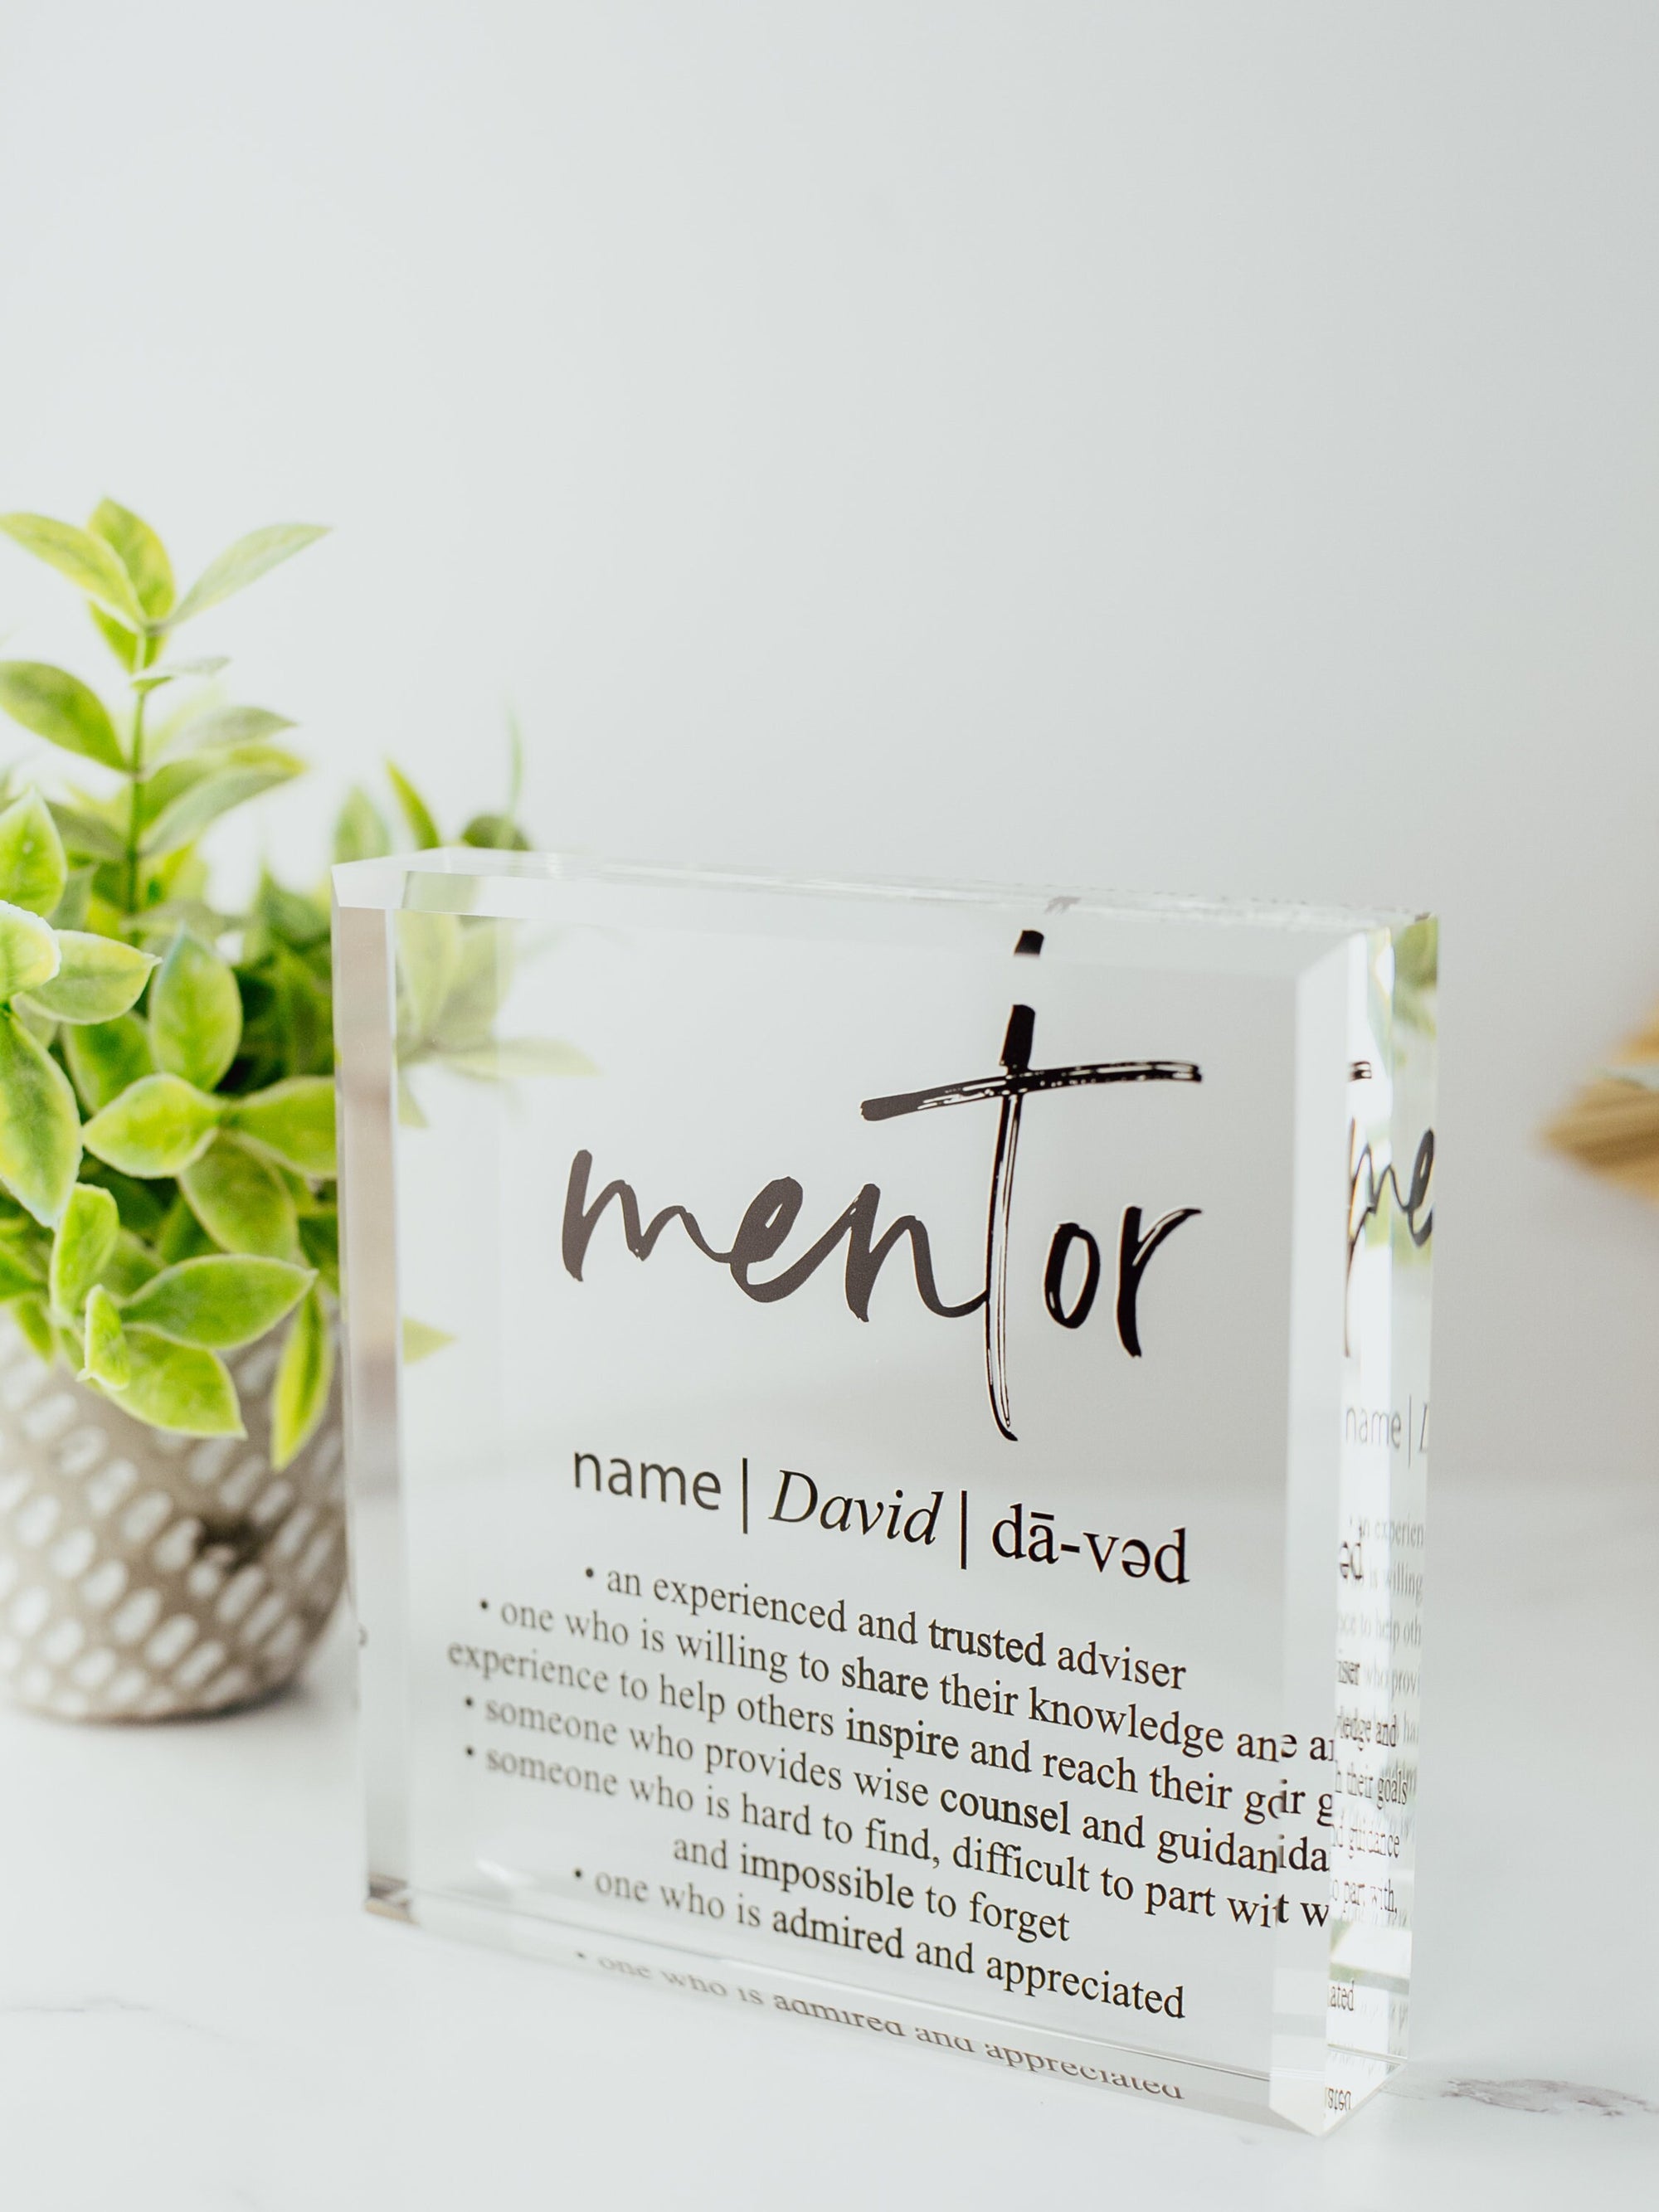 Mentor Definition Crystal Glass Plaque, for Employee Recognition, CEO, Life Coach Trophy, Appreciation Gift Plaque, Present from Staff, Boss